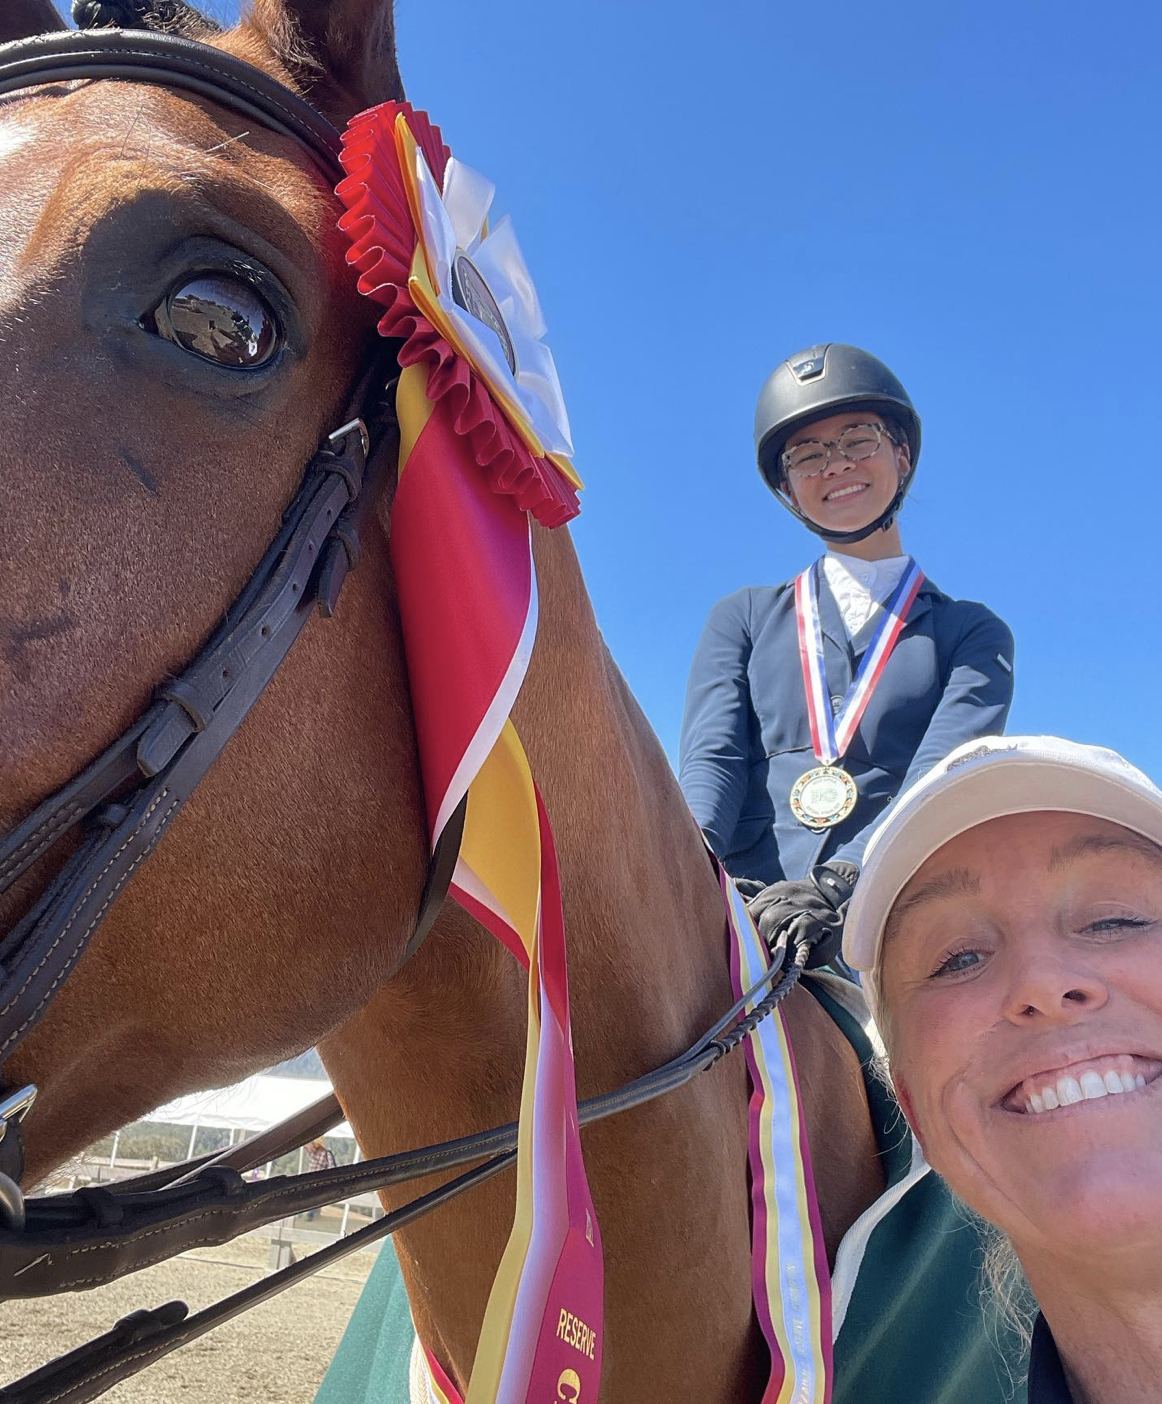 Selfie with a student and her horse. Photo: Kelly Maddox